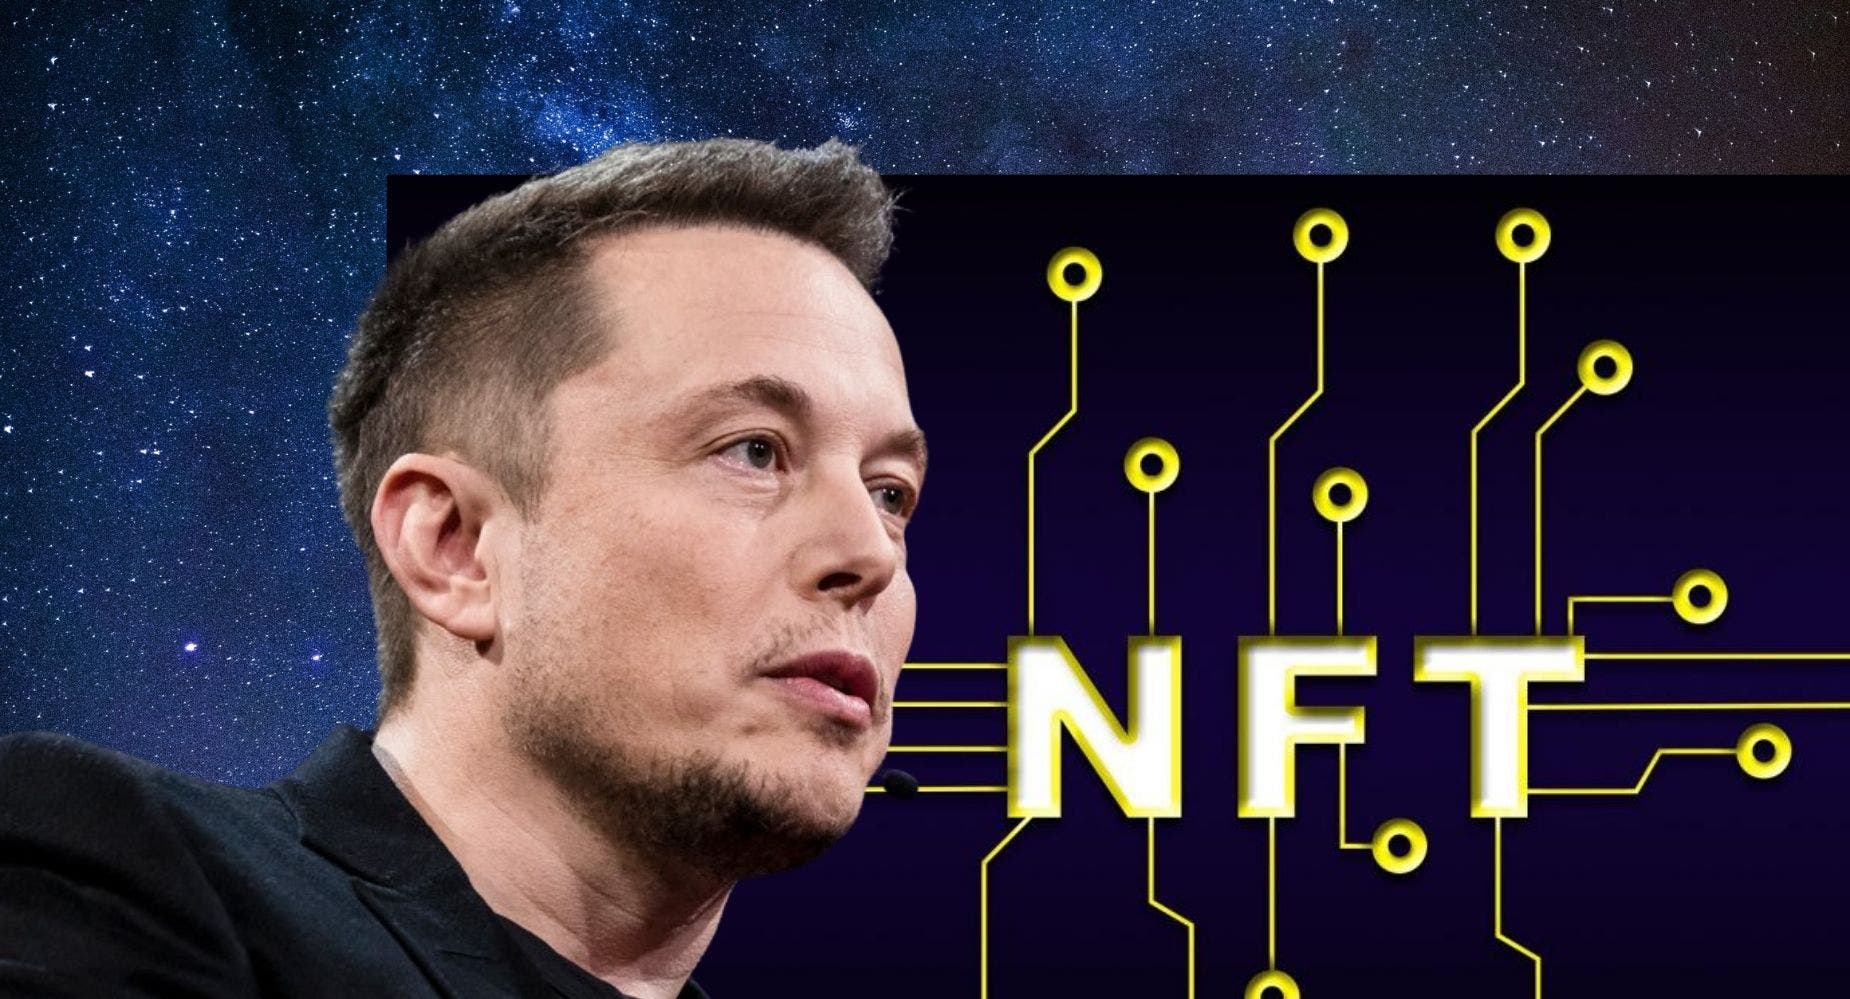 Elon Musk To Pump NFTs Next? NFT Creator Beeple Acknowledged By Tesla CEO